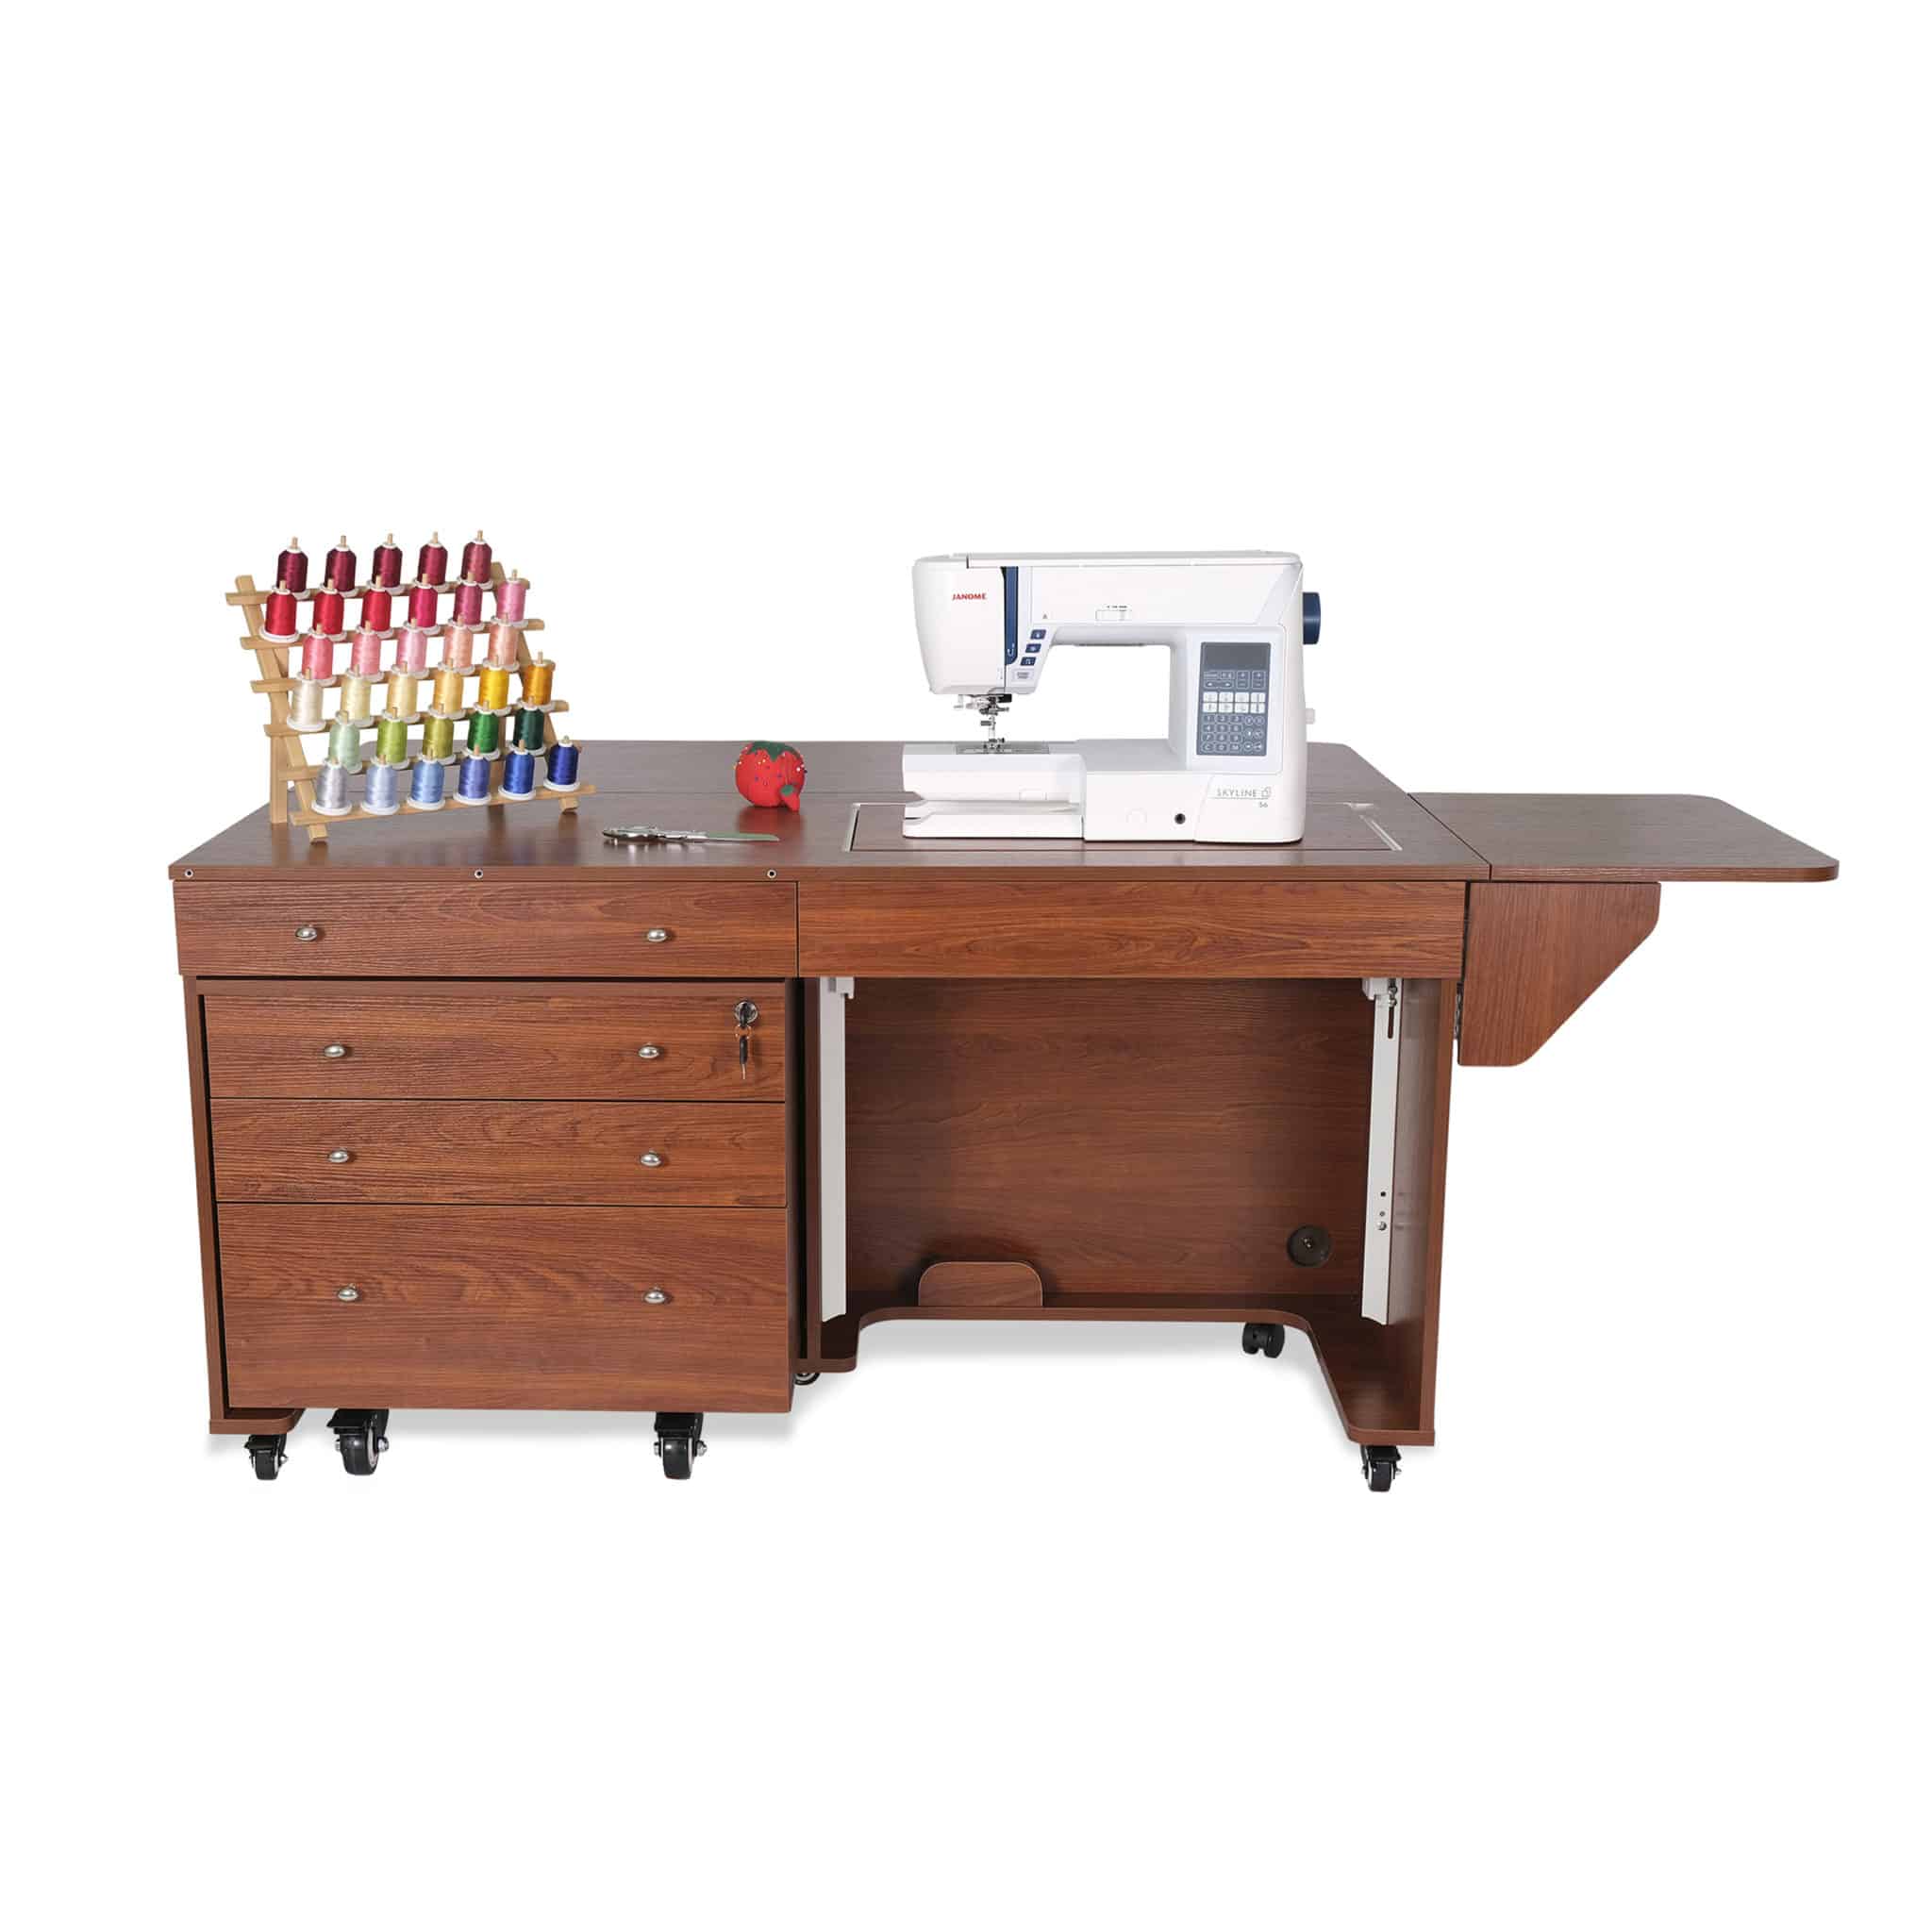 Ava Embroidery Cabinet – Creative Sewing Center